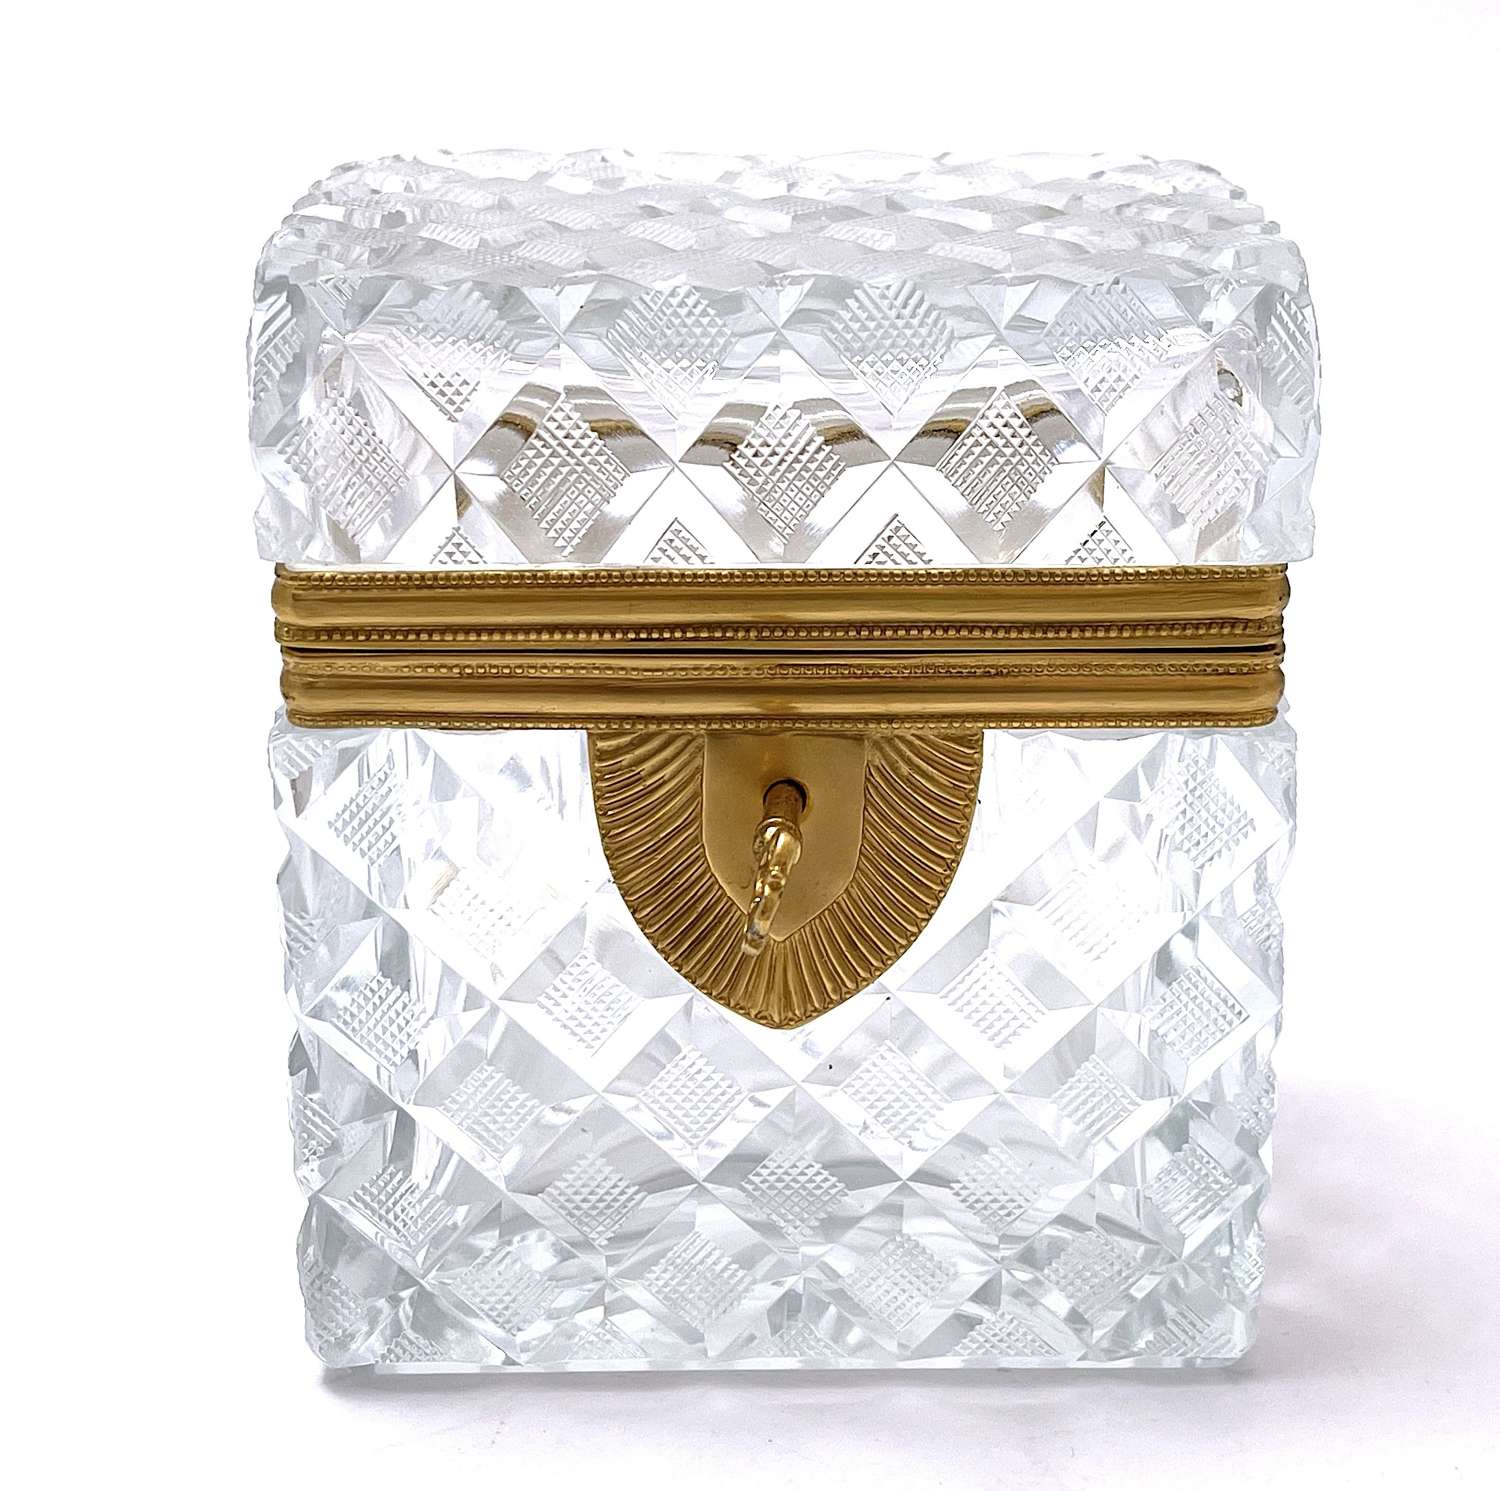 Antique Baccarat Cut Crystal Jewellery Casket Box and Key